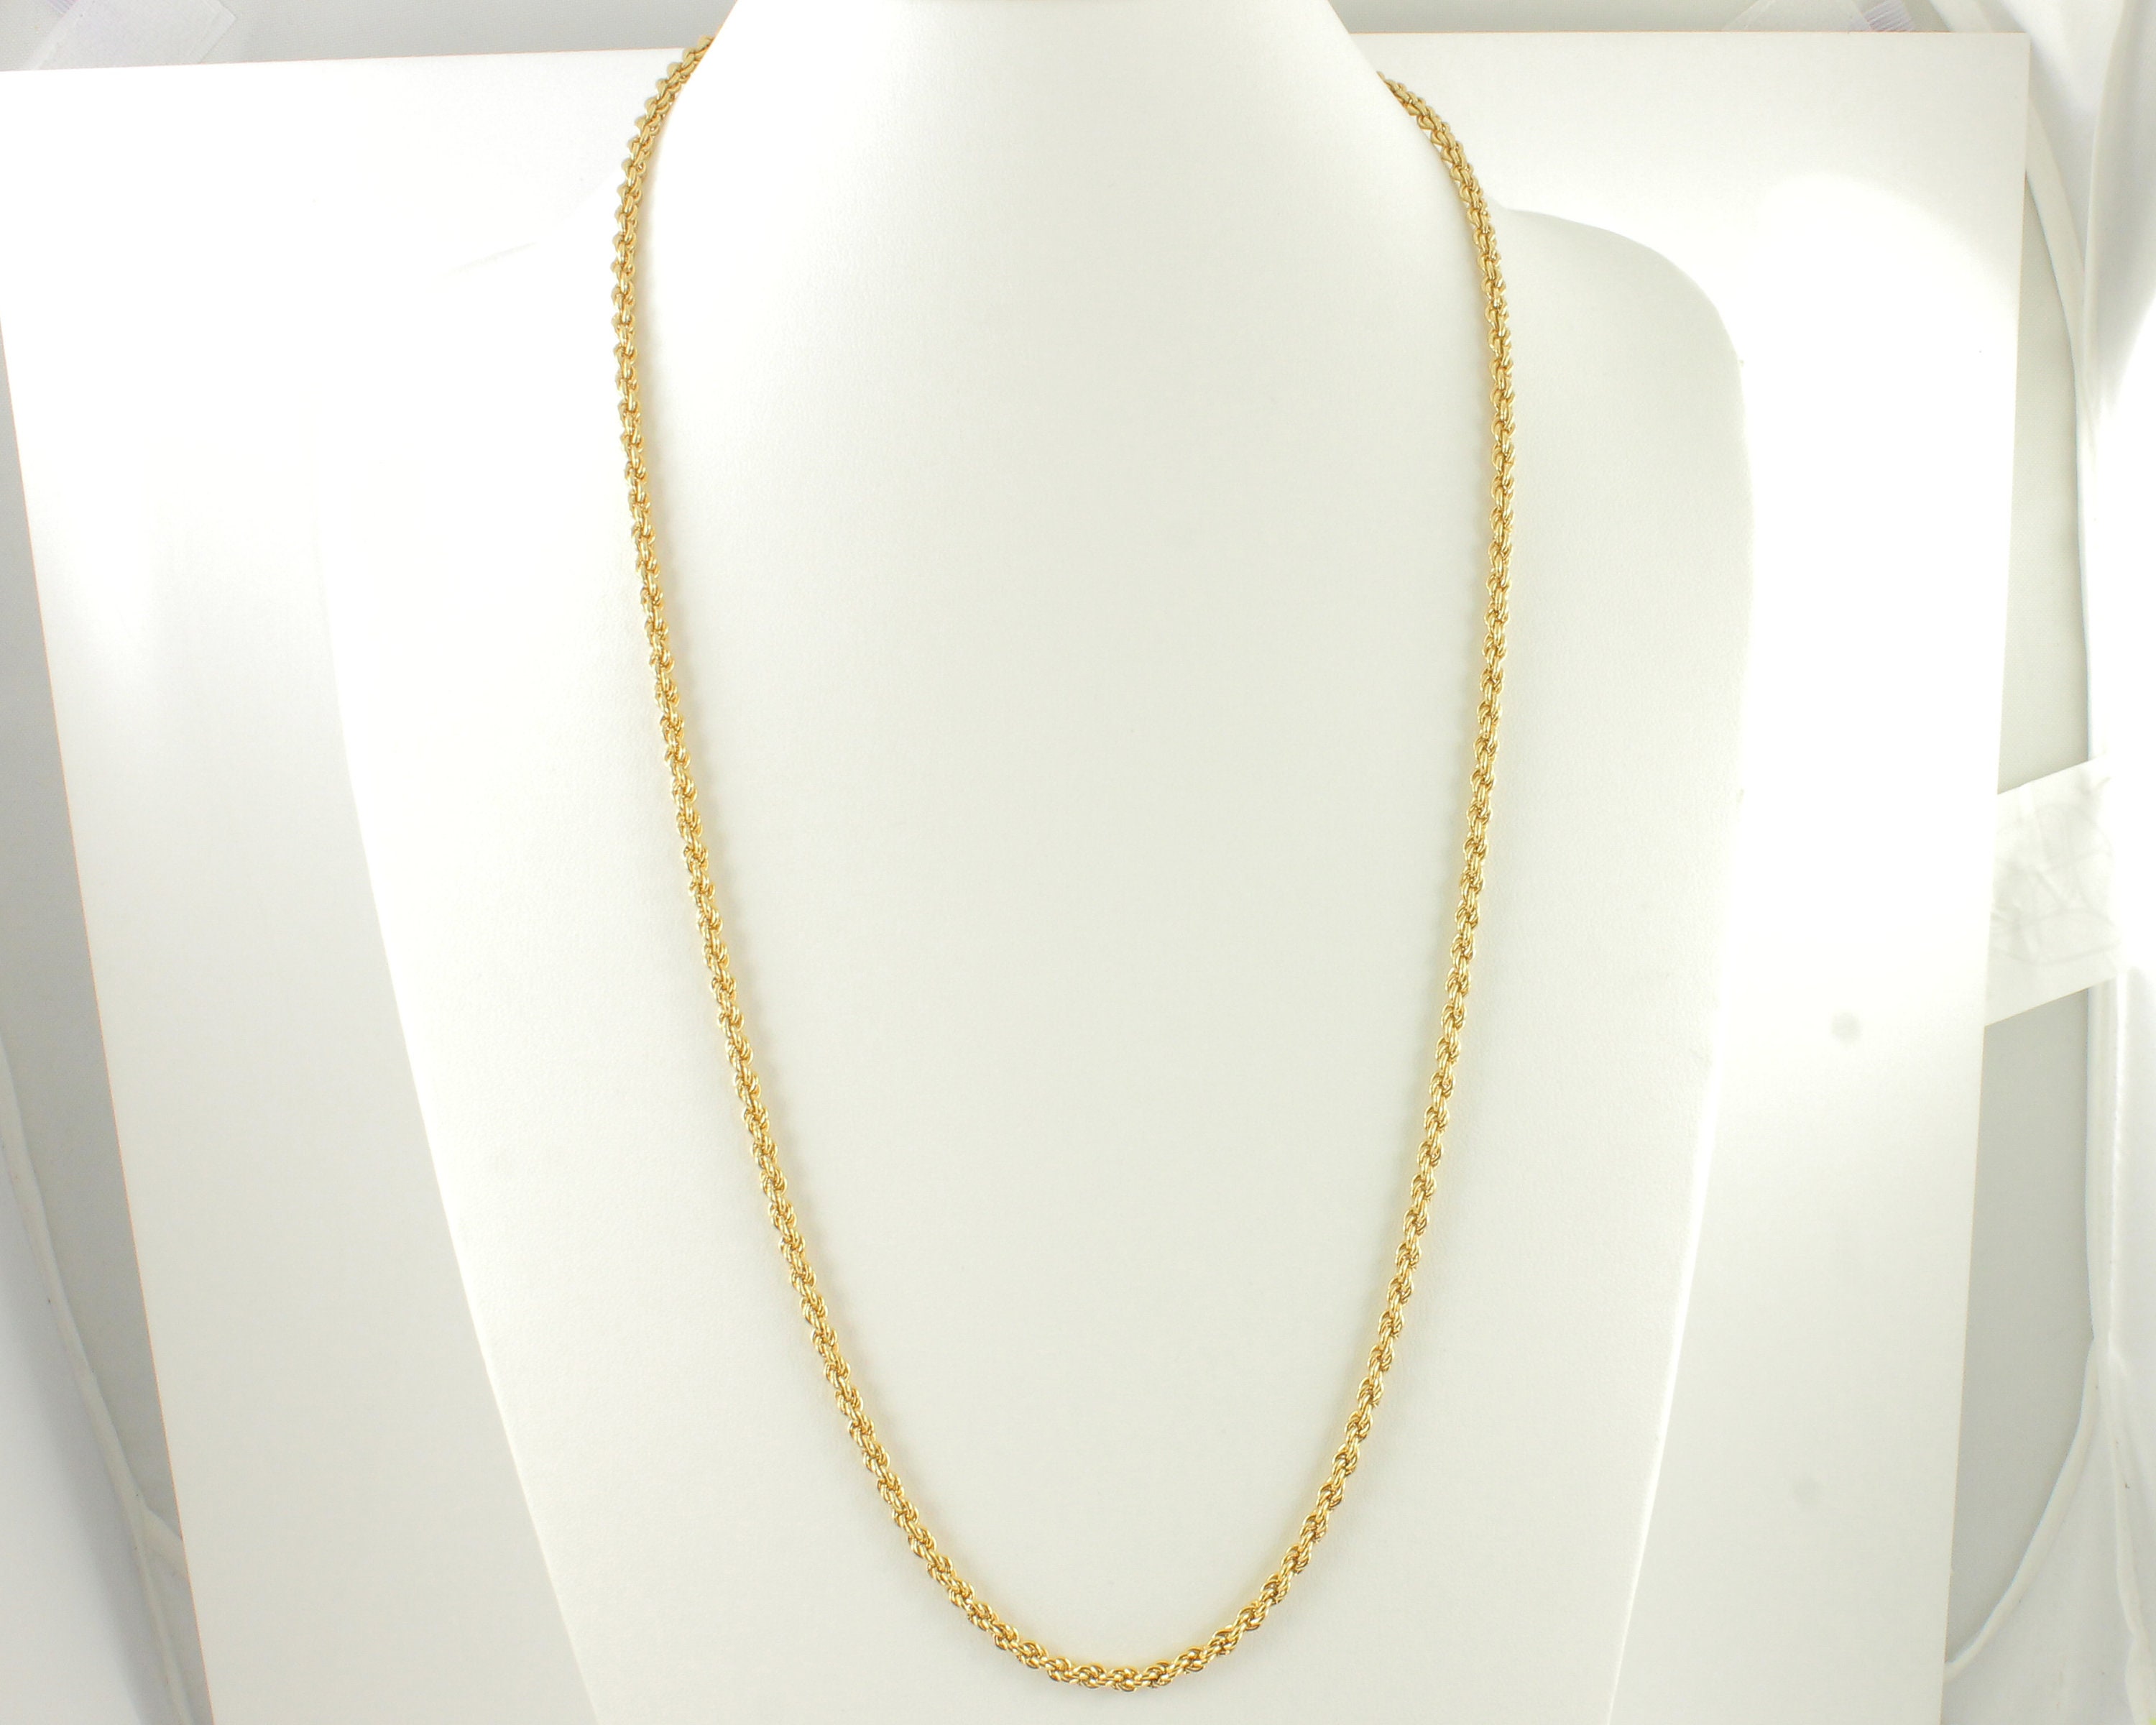 Vintage Heavy Gold Tone Monet Double Strand Chain Link and Twist Necklace -  L138cm - Sourced USA - Becker Minty